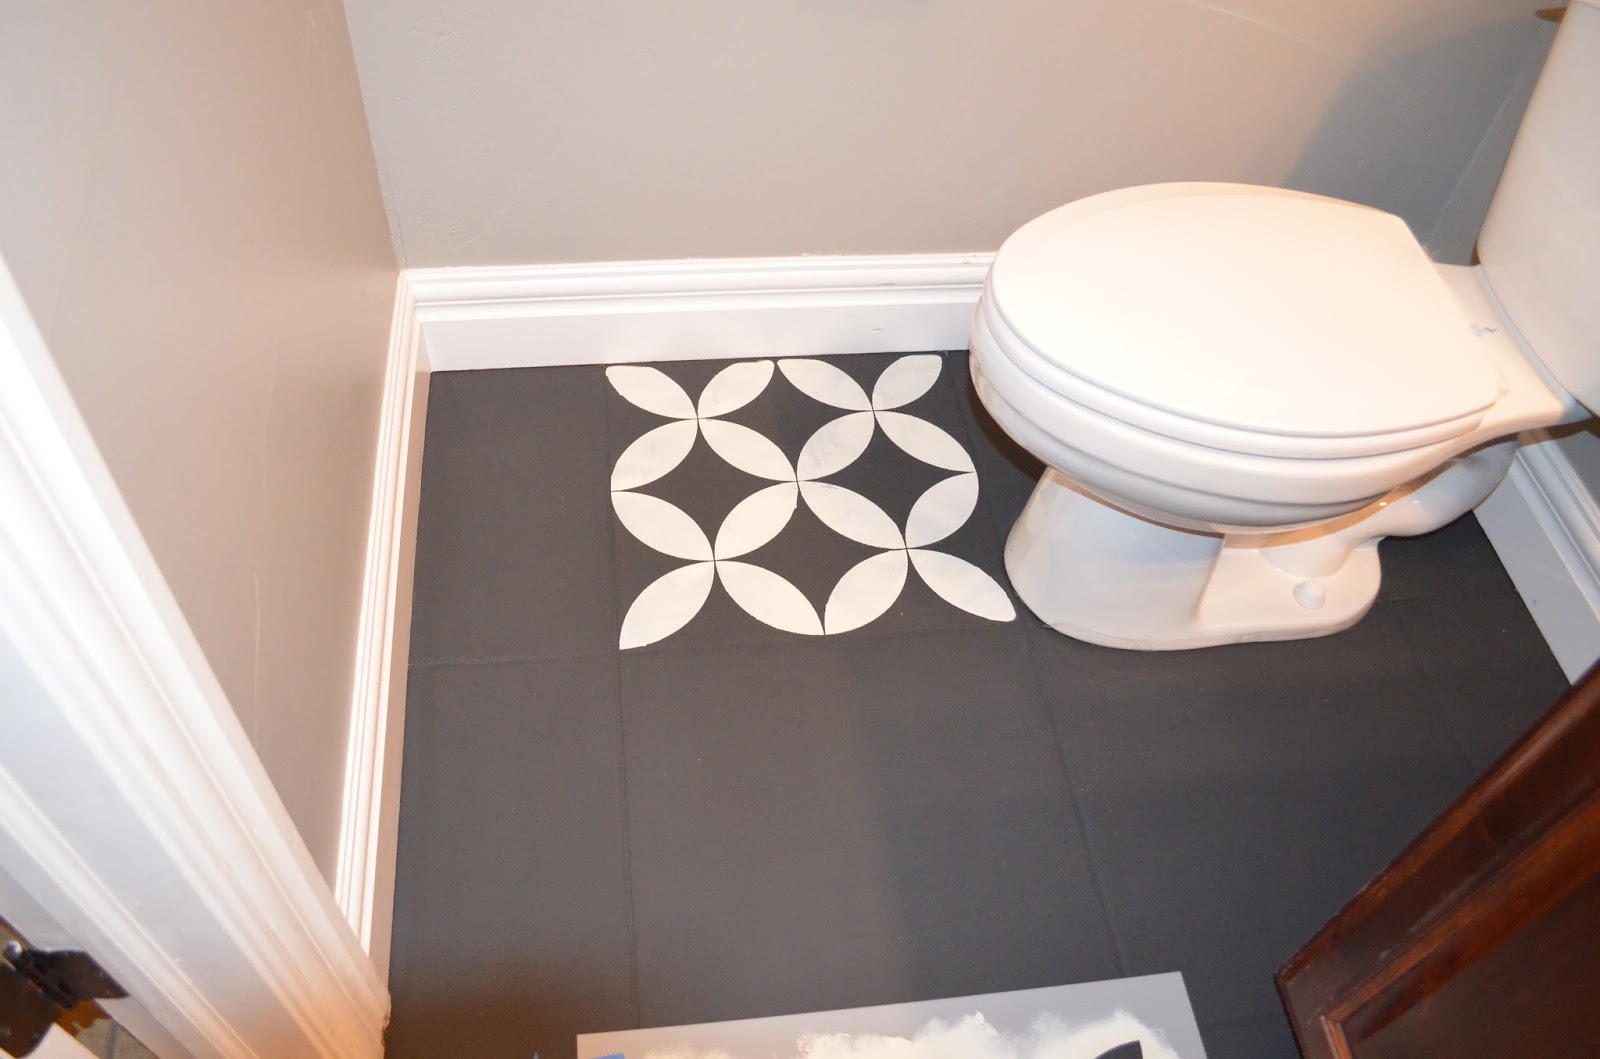 The Girl Who Painted Her Tile What, How To Paint Ceramic Floor Tile